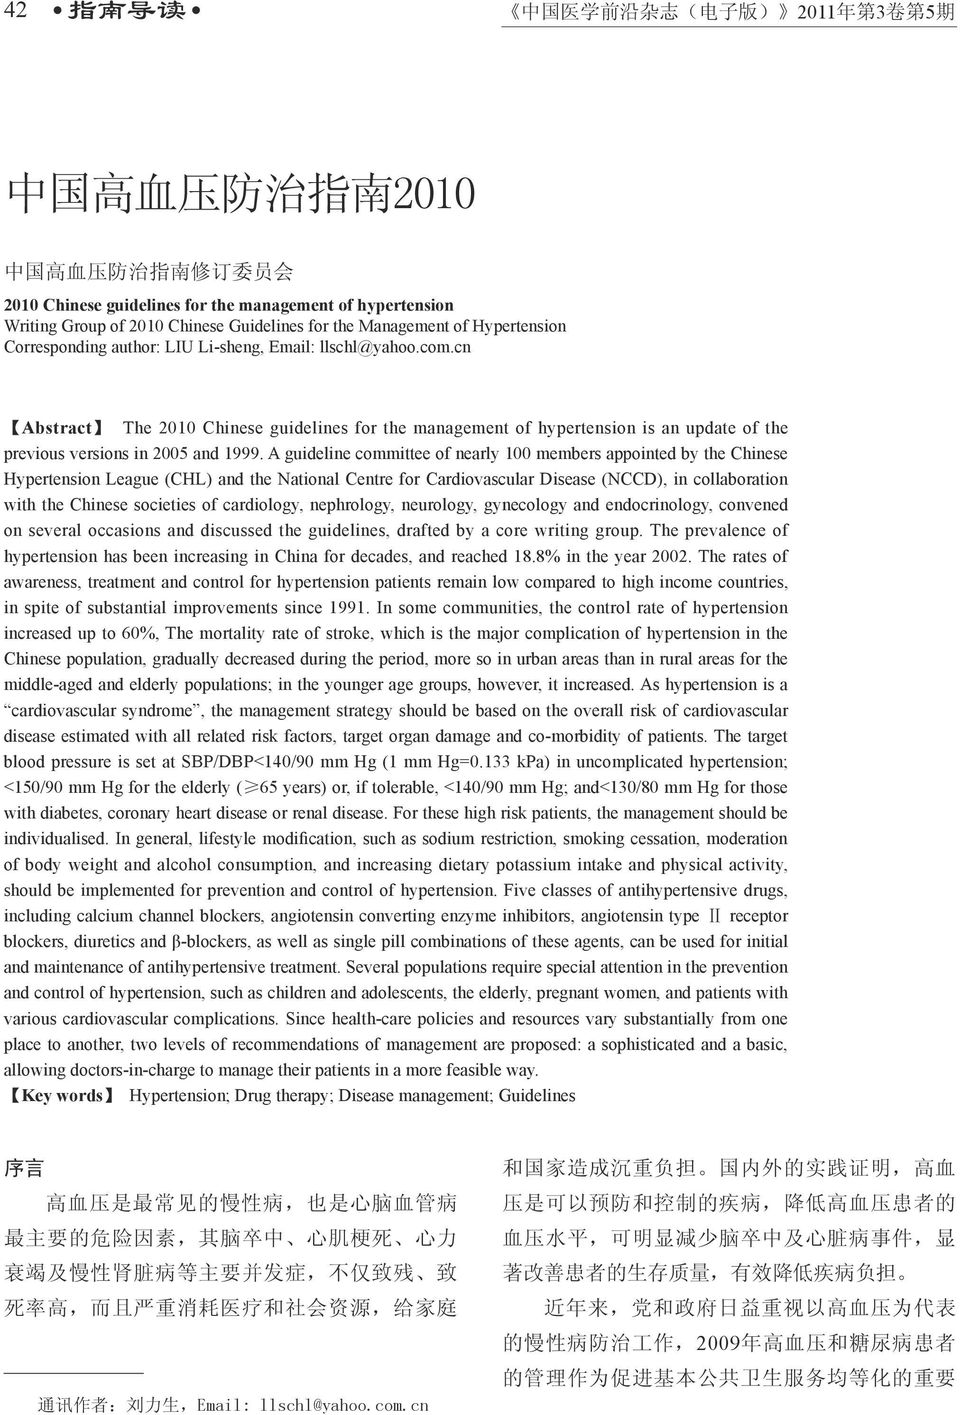 cn Abstract The 2010 Chinese guidelines for the management of hypertension is an update of the previous versions in 2005 and 1999.